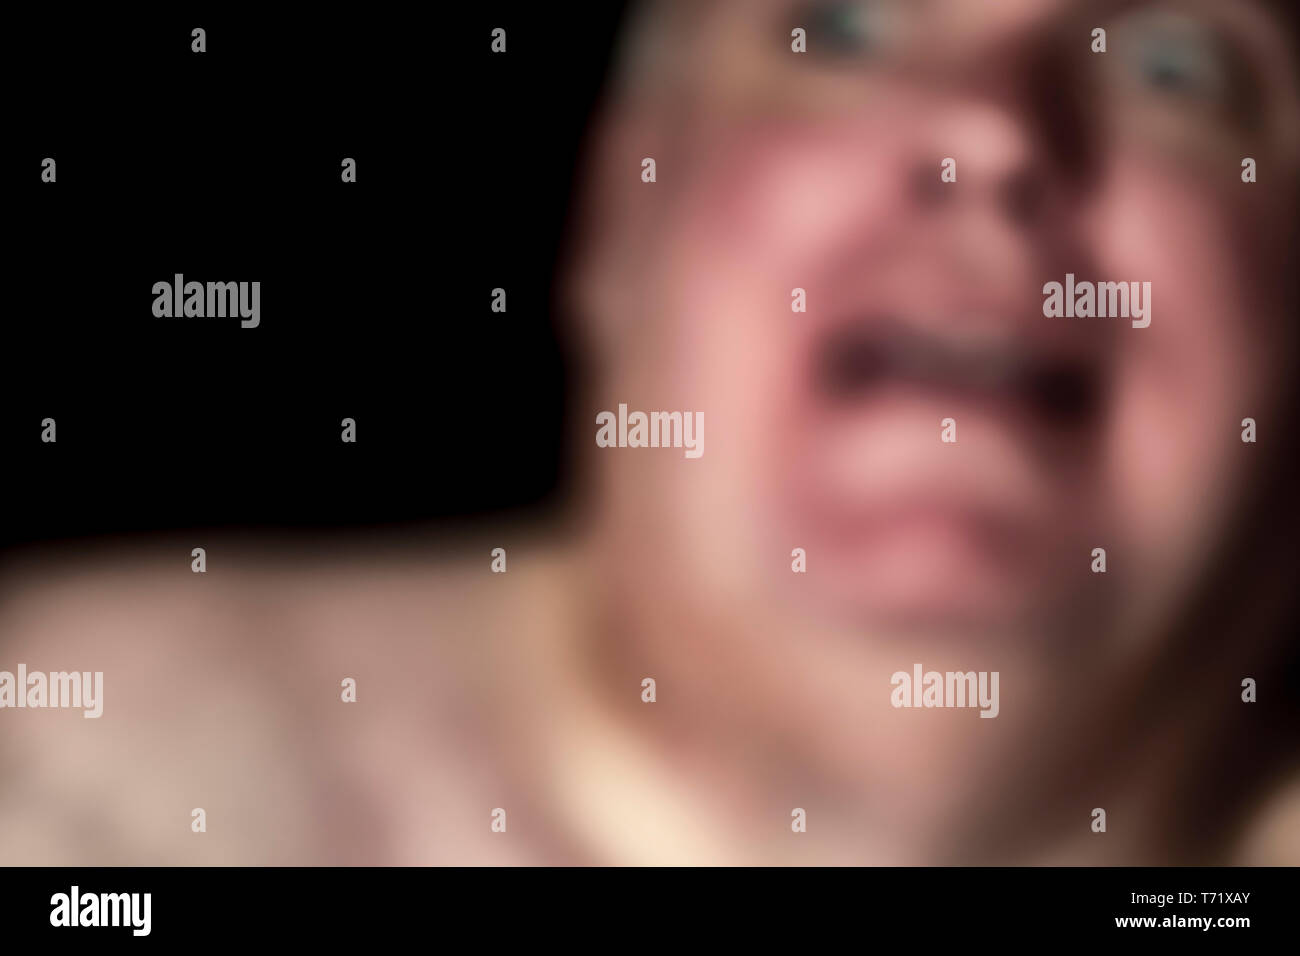 Abstract blurred image on a man with a petrified, frightened, scared stiff, shocked, terrified or surprised look on his face. Needing help. Copy space. Stock Photo